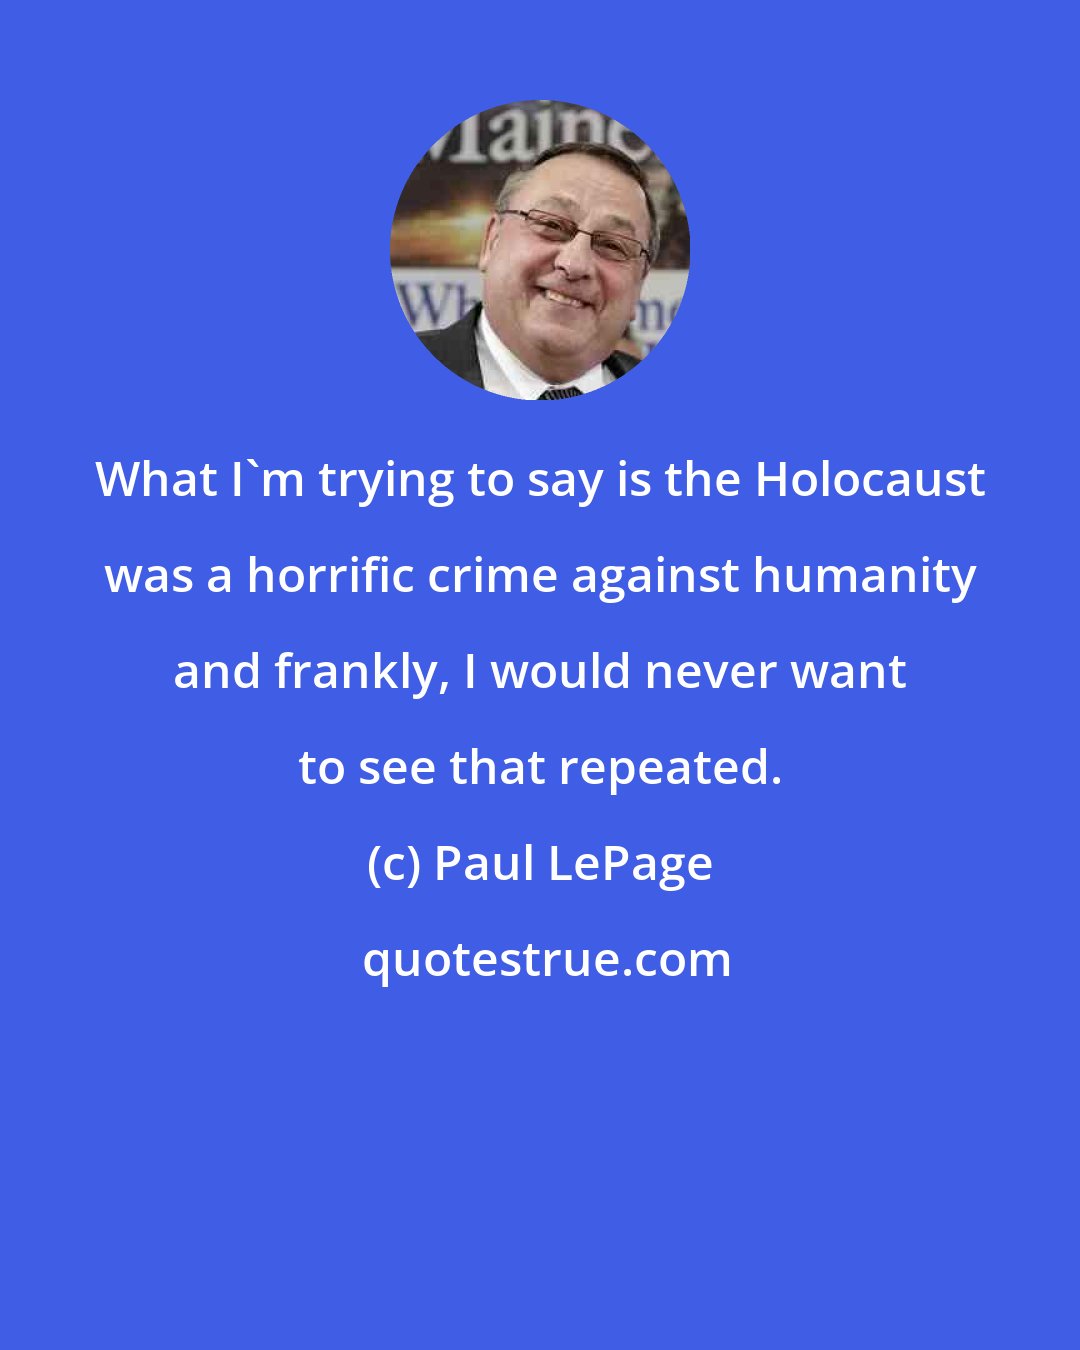 Paul LePage: What I'm trying to say is the Holocaust was a horrific crime against humanity and frankly, I would never want to see that repeated.